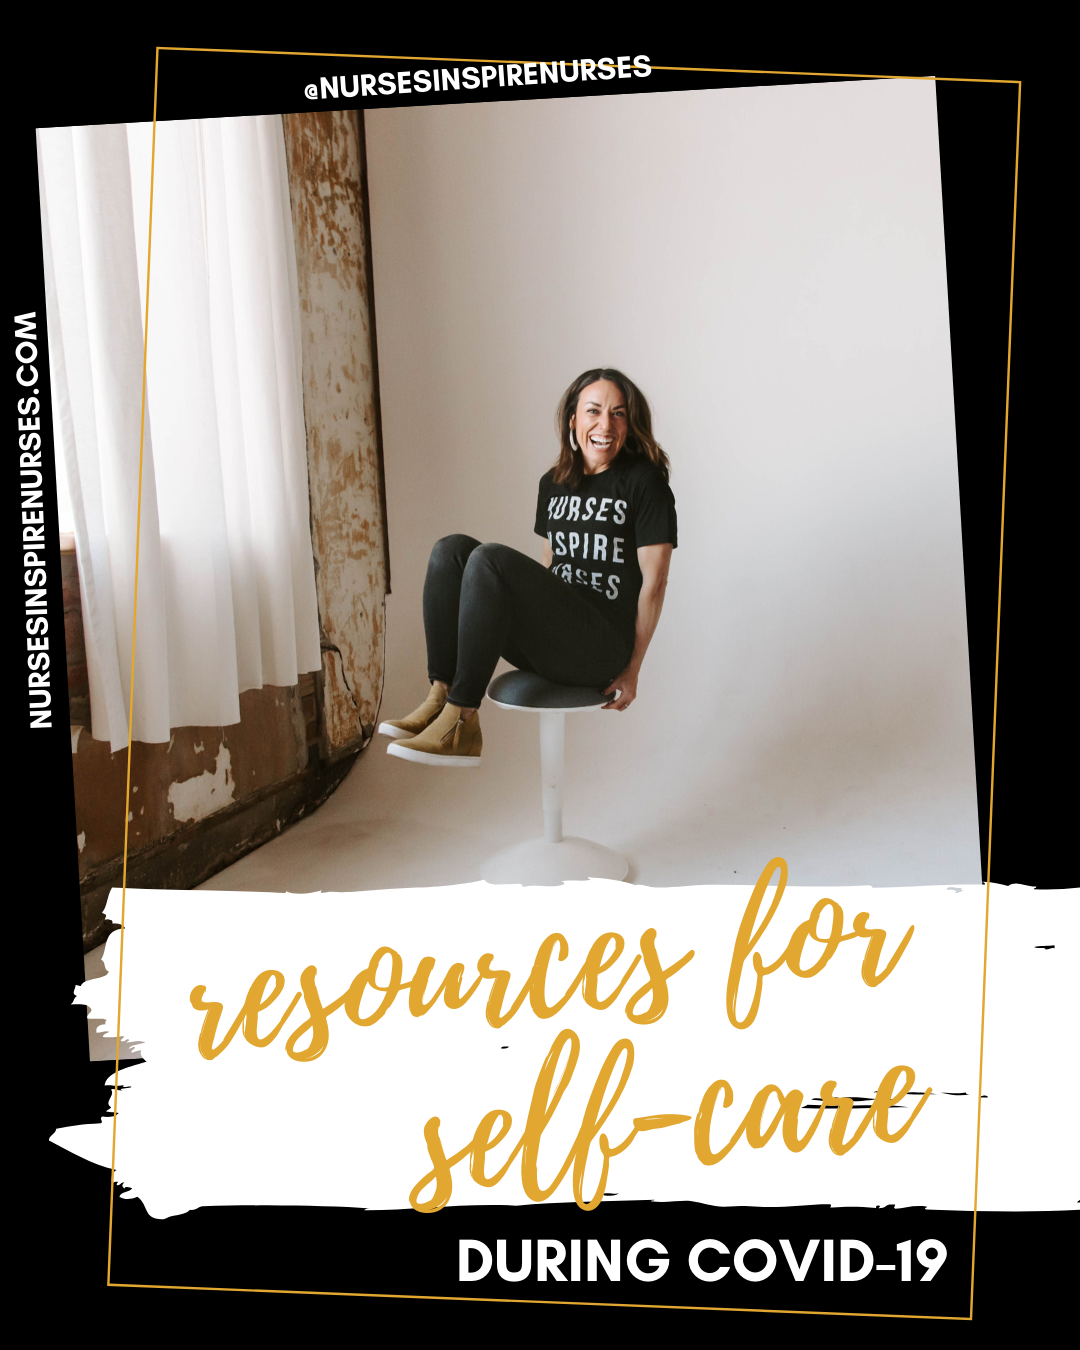 Resources for Self-Care during COVID-19